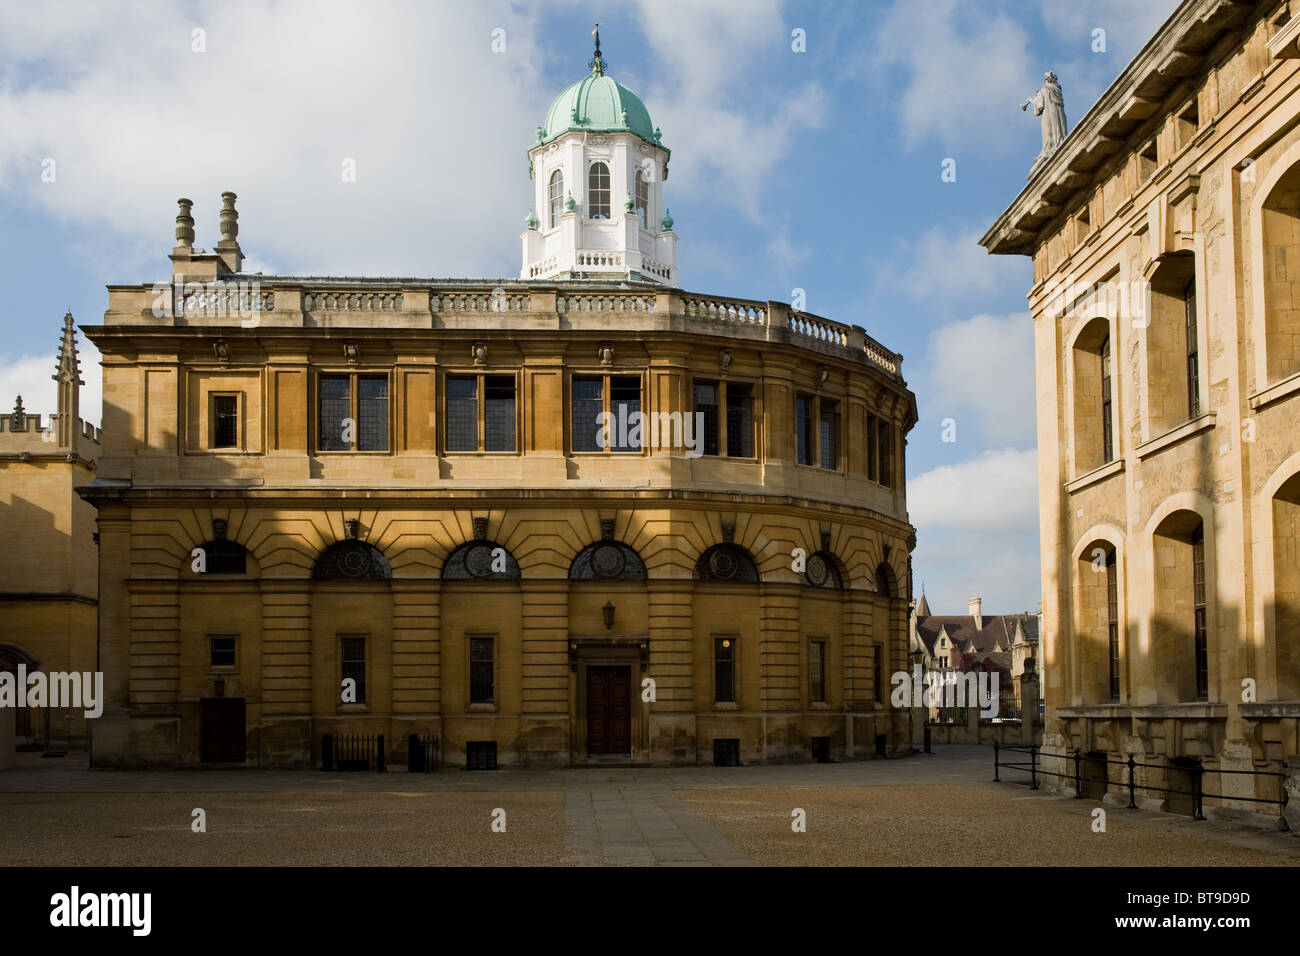 The Sheldonian Theatre (designed by Sir Christopher Wren) in Oxford with the Clarendon Building to its right Stock Photo